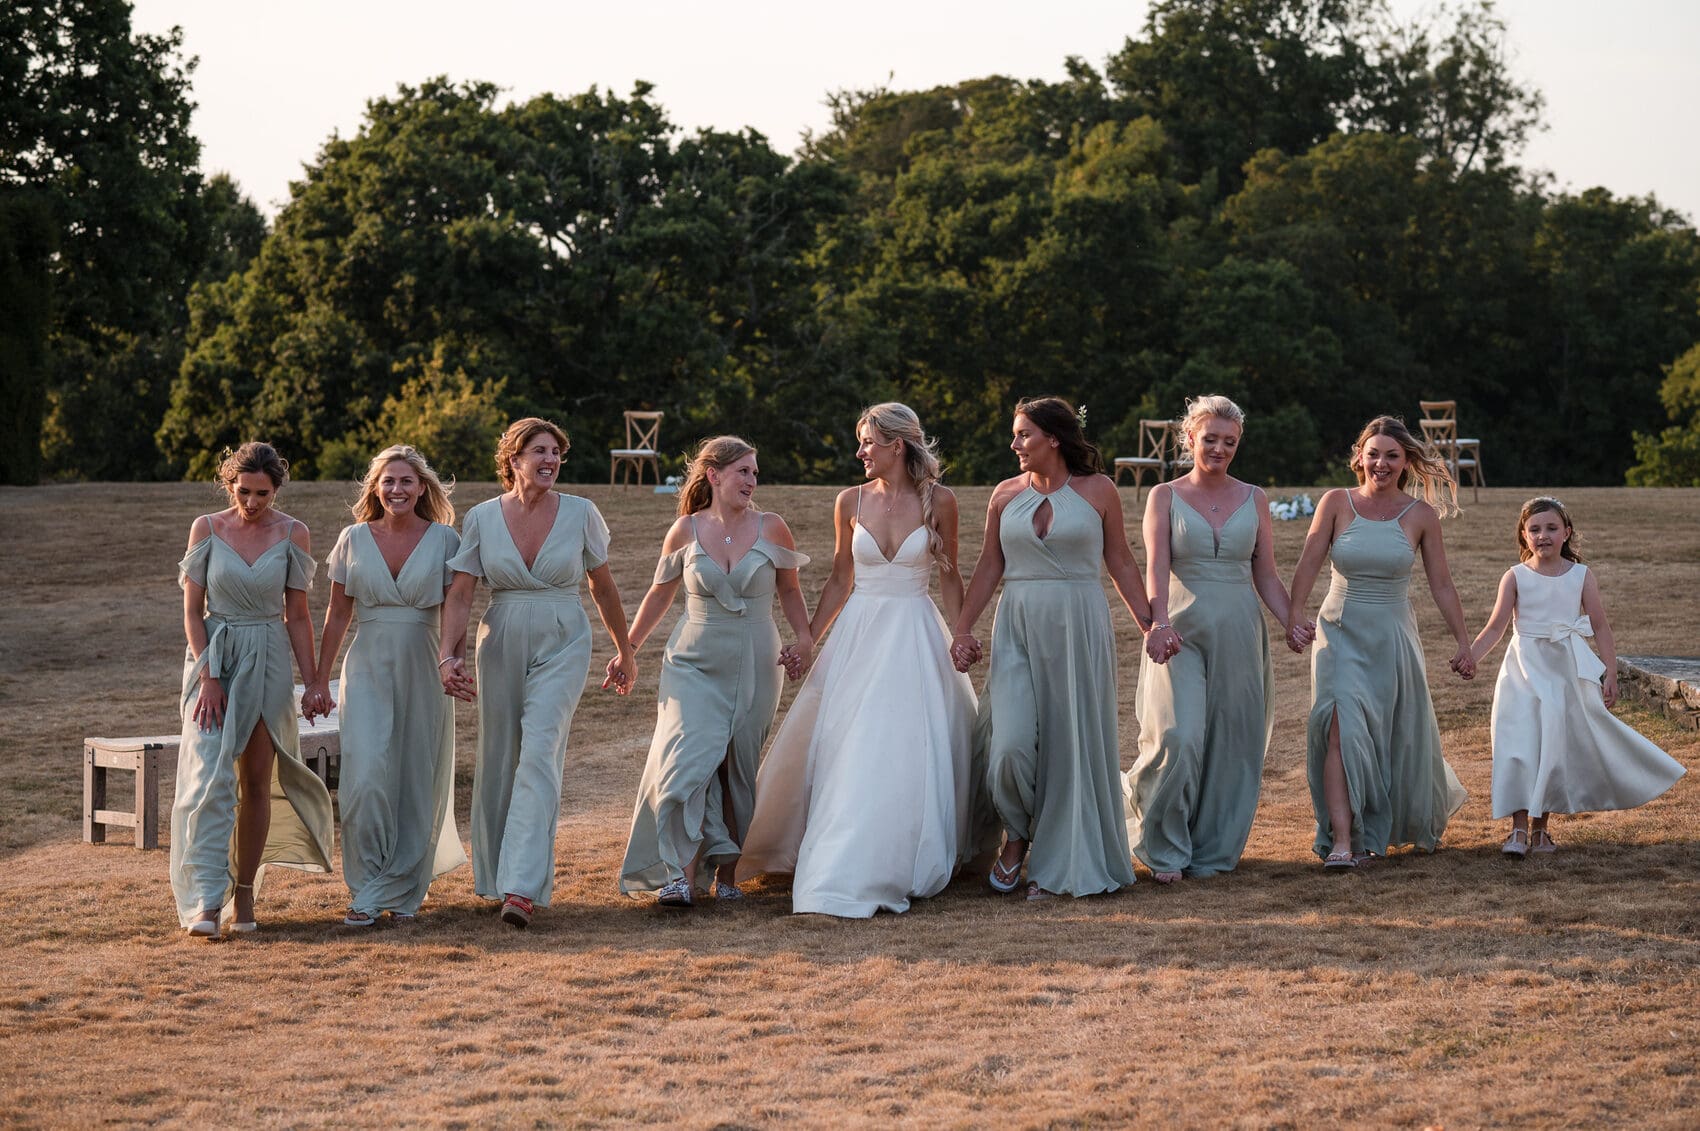 Bridesmaids walking on Lawn at Hale Park House Wedding